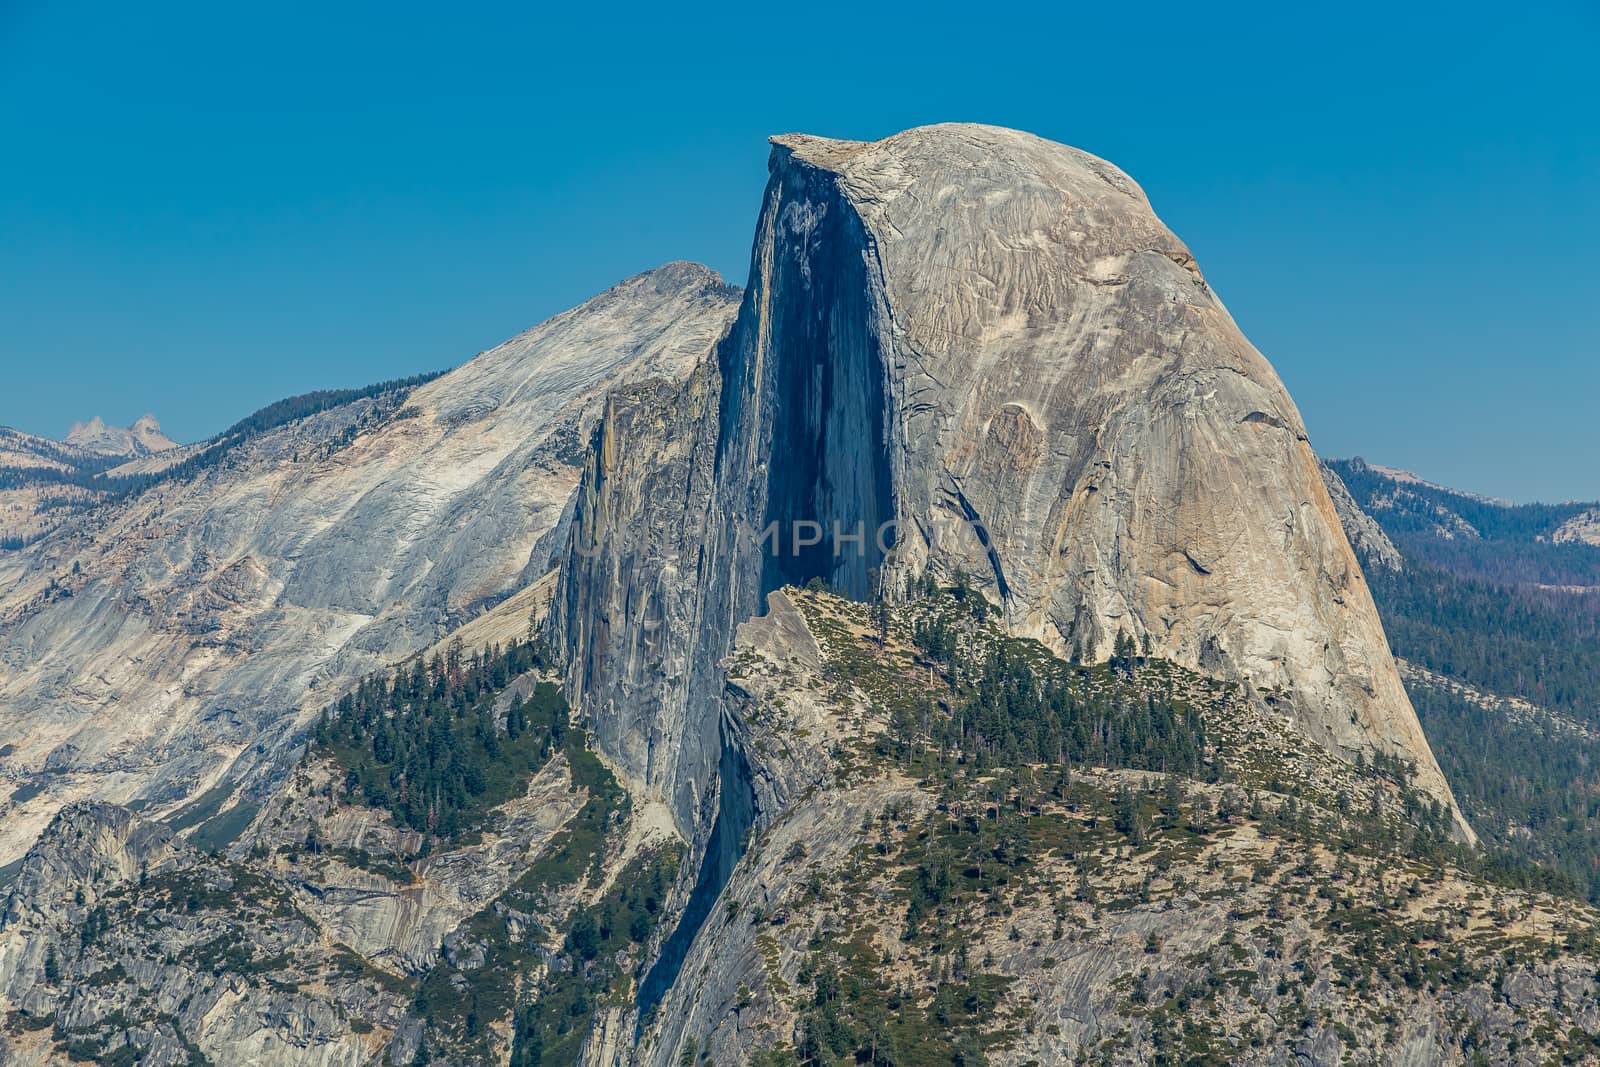 Half Dome is a granite dome at the eastern end of Yosemite Valley in Yosemite National Park, California. It is a well-known rock formation in the park, named for its distinct shape. One side is a sheer face while the other three sides are smooth and round, making it appear like a dome cut in half. The granite crest rises more than 4,737 ft above the valley floor.